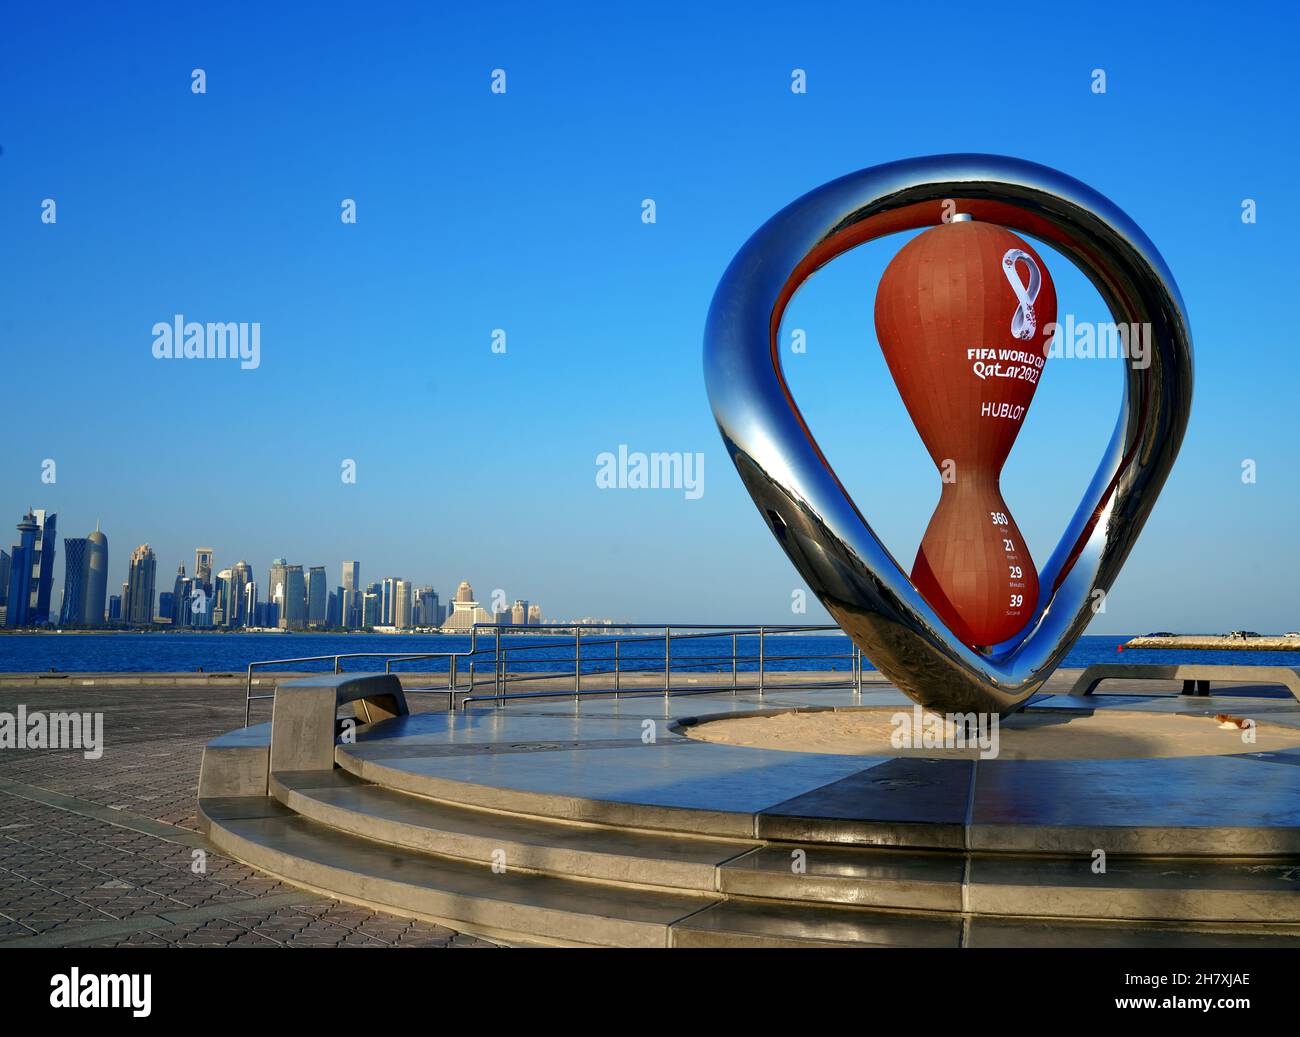 The FIFA World Cup Qatar 2022™ Official Countdown Clock, powered by Hublot, was unveiled on Sunday 21 November at Dohas picturesque Corniche Fishing Stock Photo